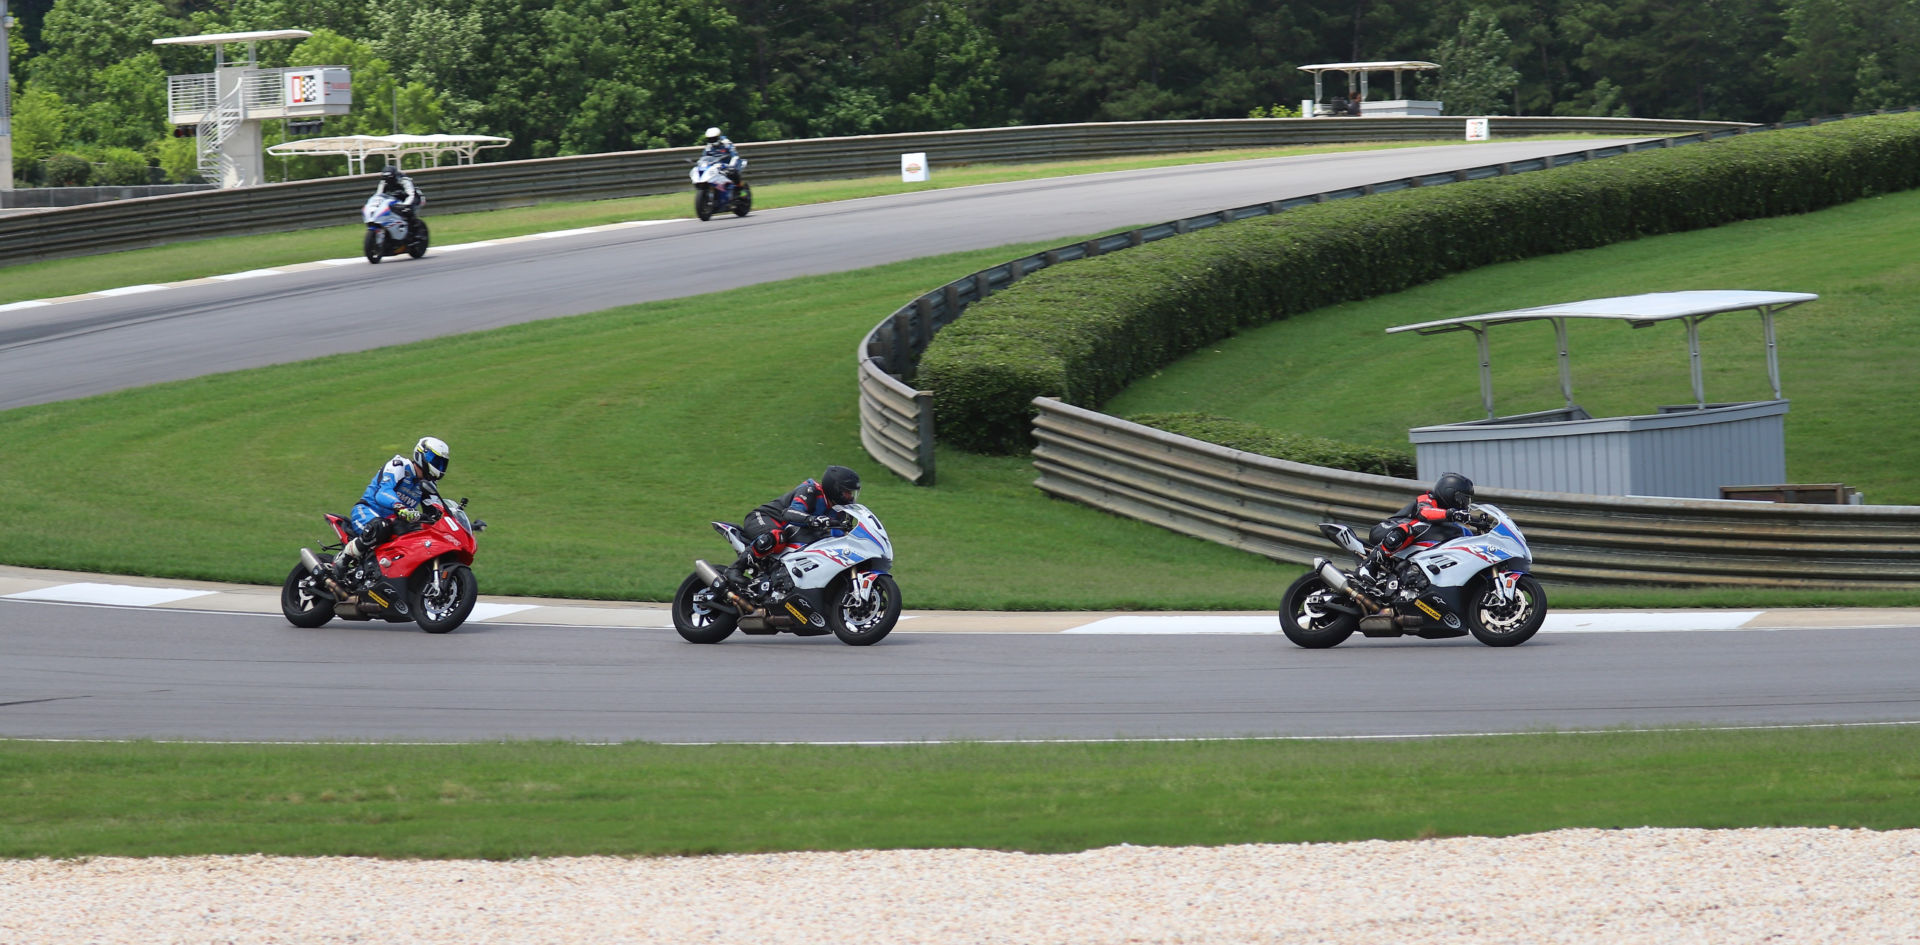 A scene from a California Superbike School at Barber Motorsports Park. Photo by etechphoto.com, courtesy California Superbike School.